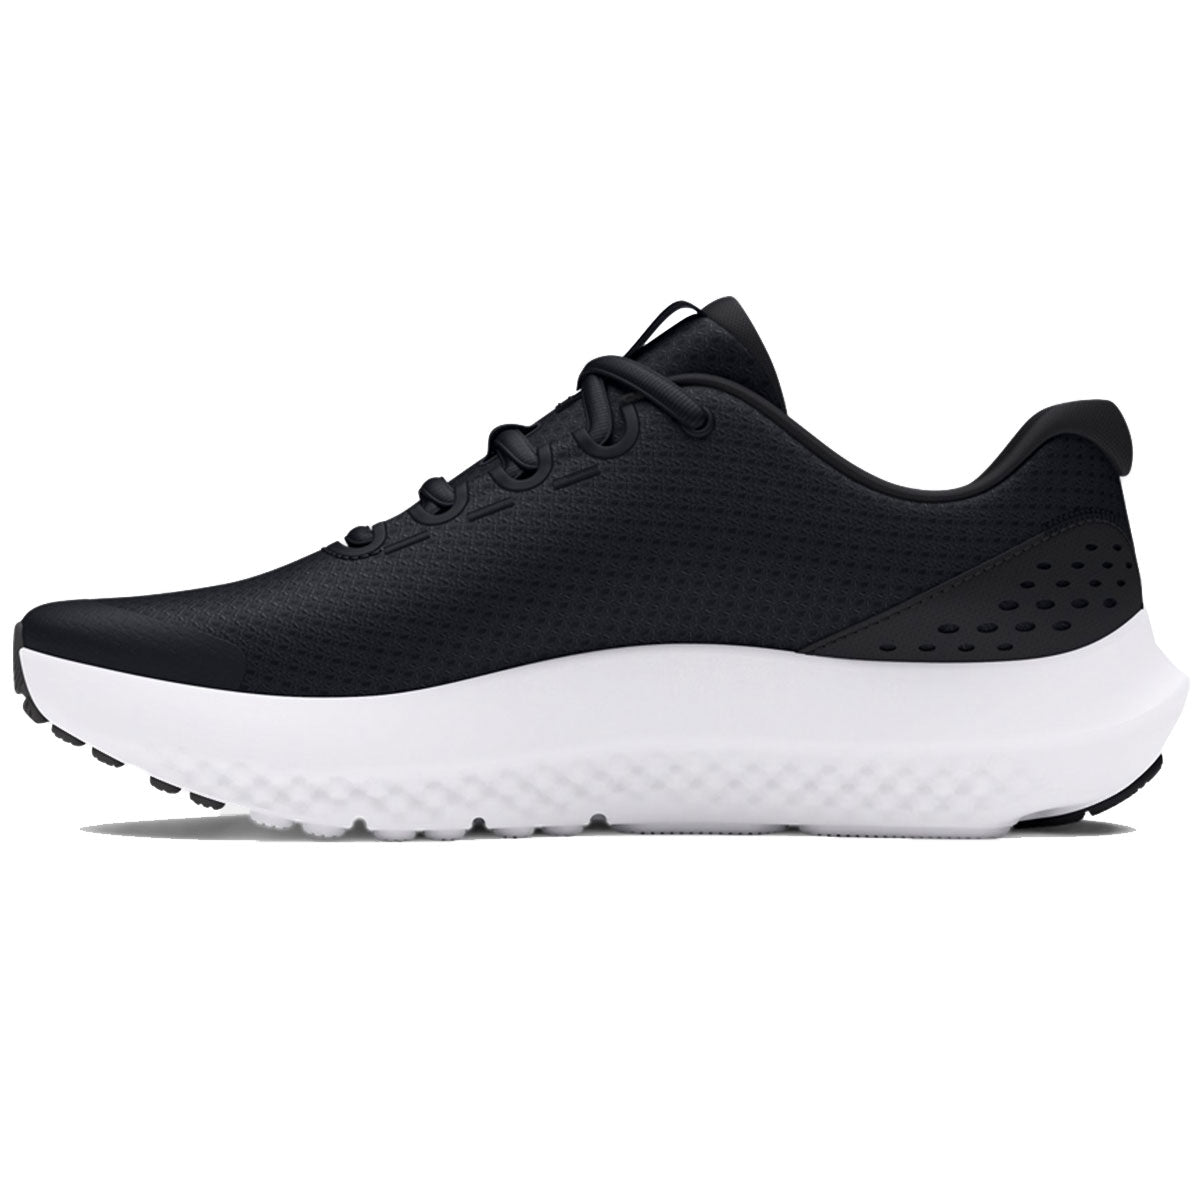 Under Armour BGS Surge 4 Running Shoes - Boys - Black/Anthracite/White